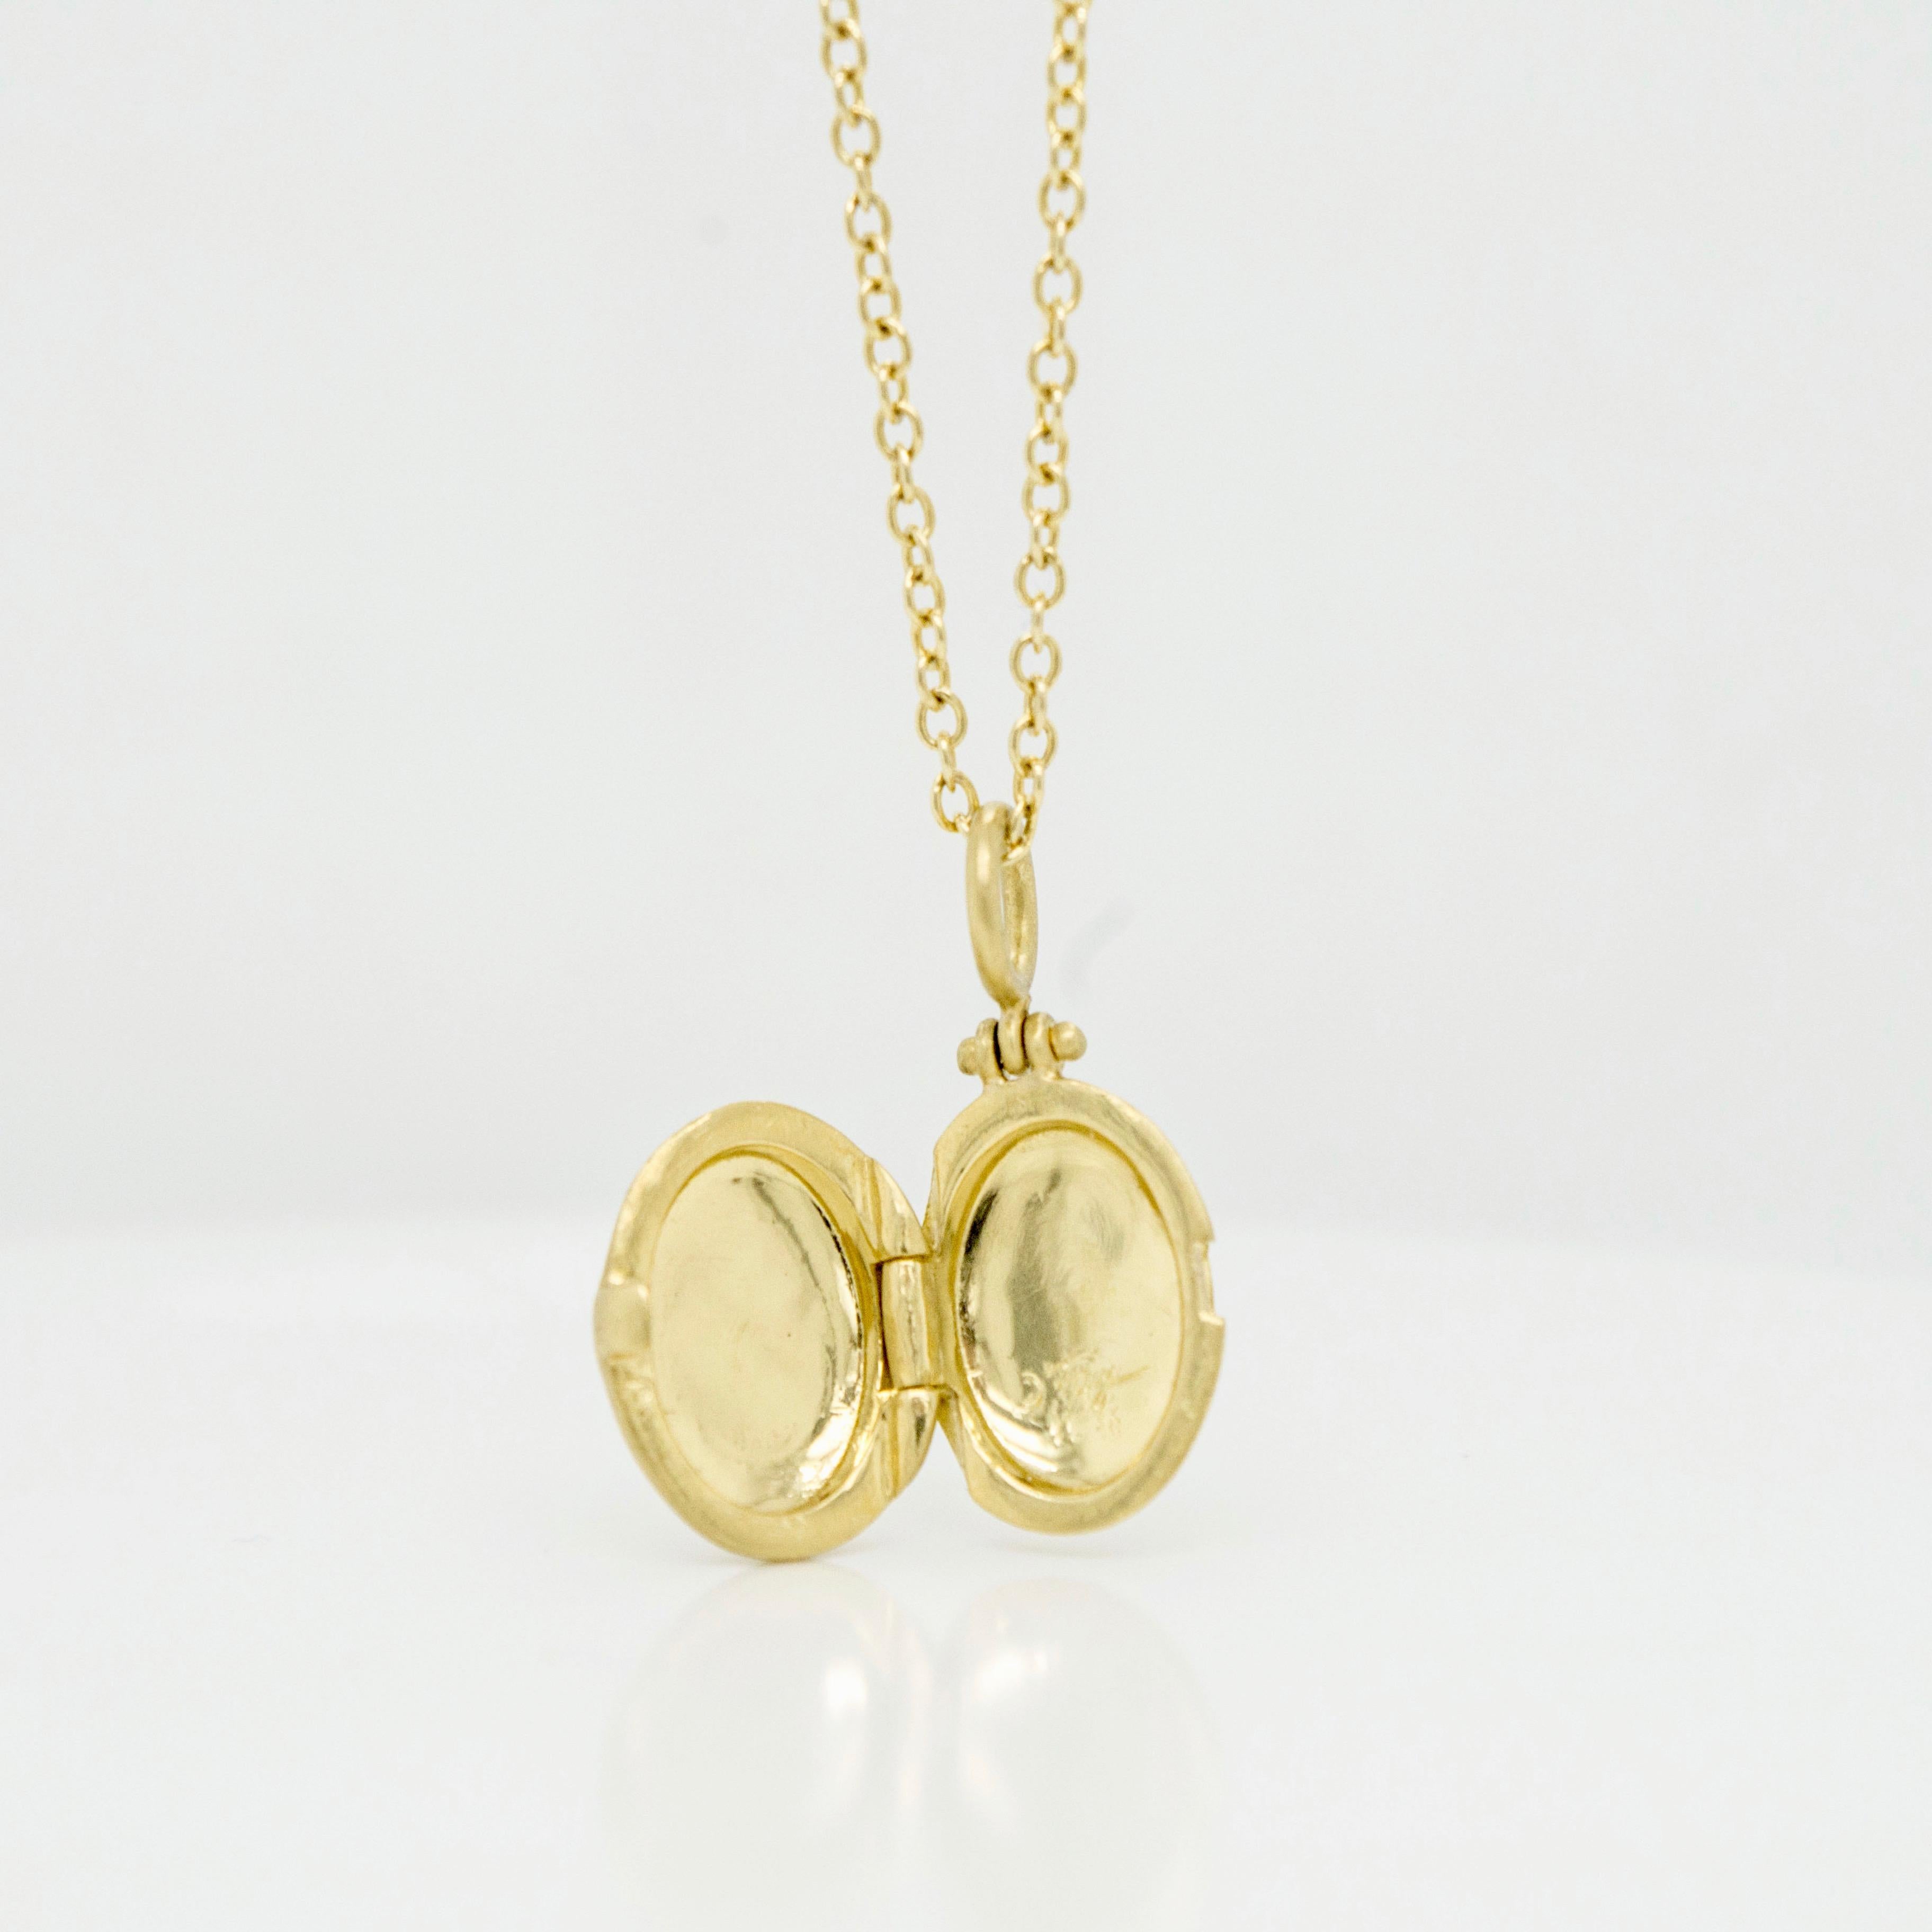 Faye Kim's 18 Karat Gold Small Round Locket combines substance with style. Finely handcrafted and matte-finished, this locket can be personalized with an engraving or with gemstones, and layered with other necklaces or worn alone.

Locket Dimensions